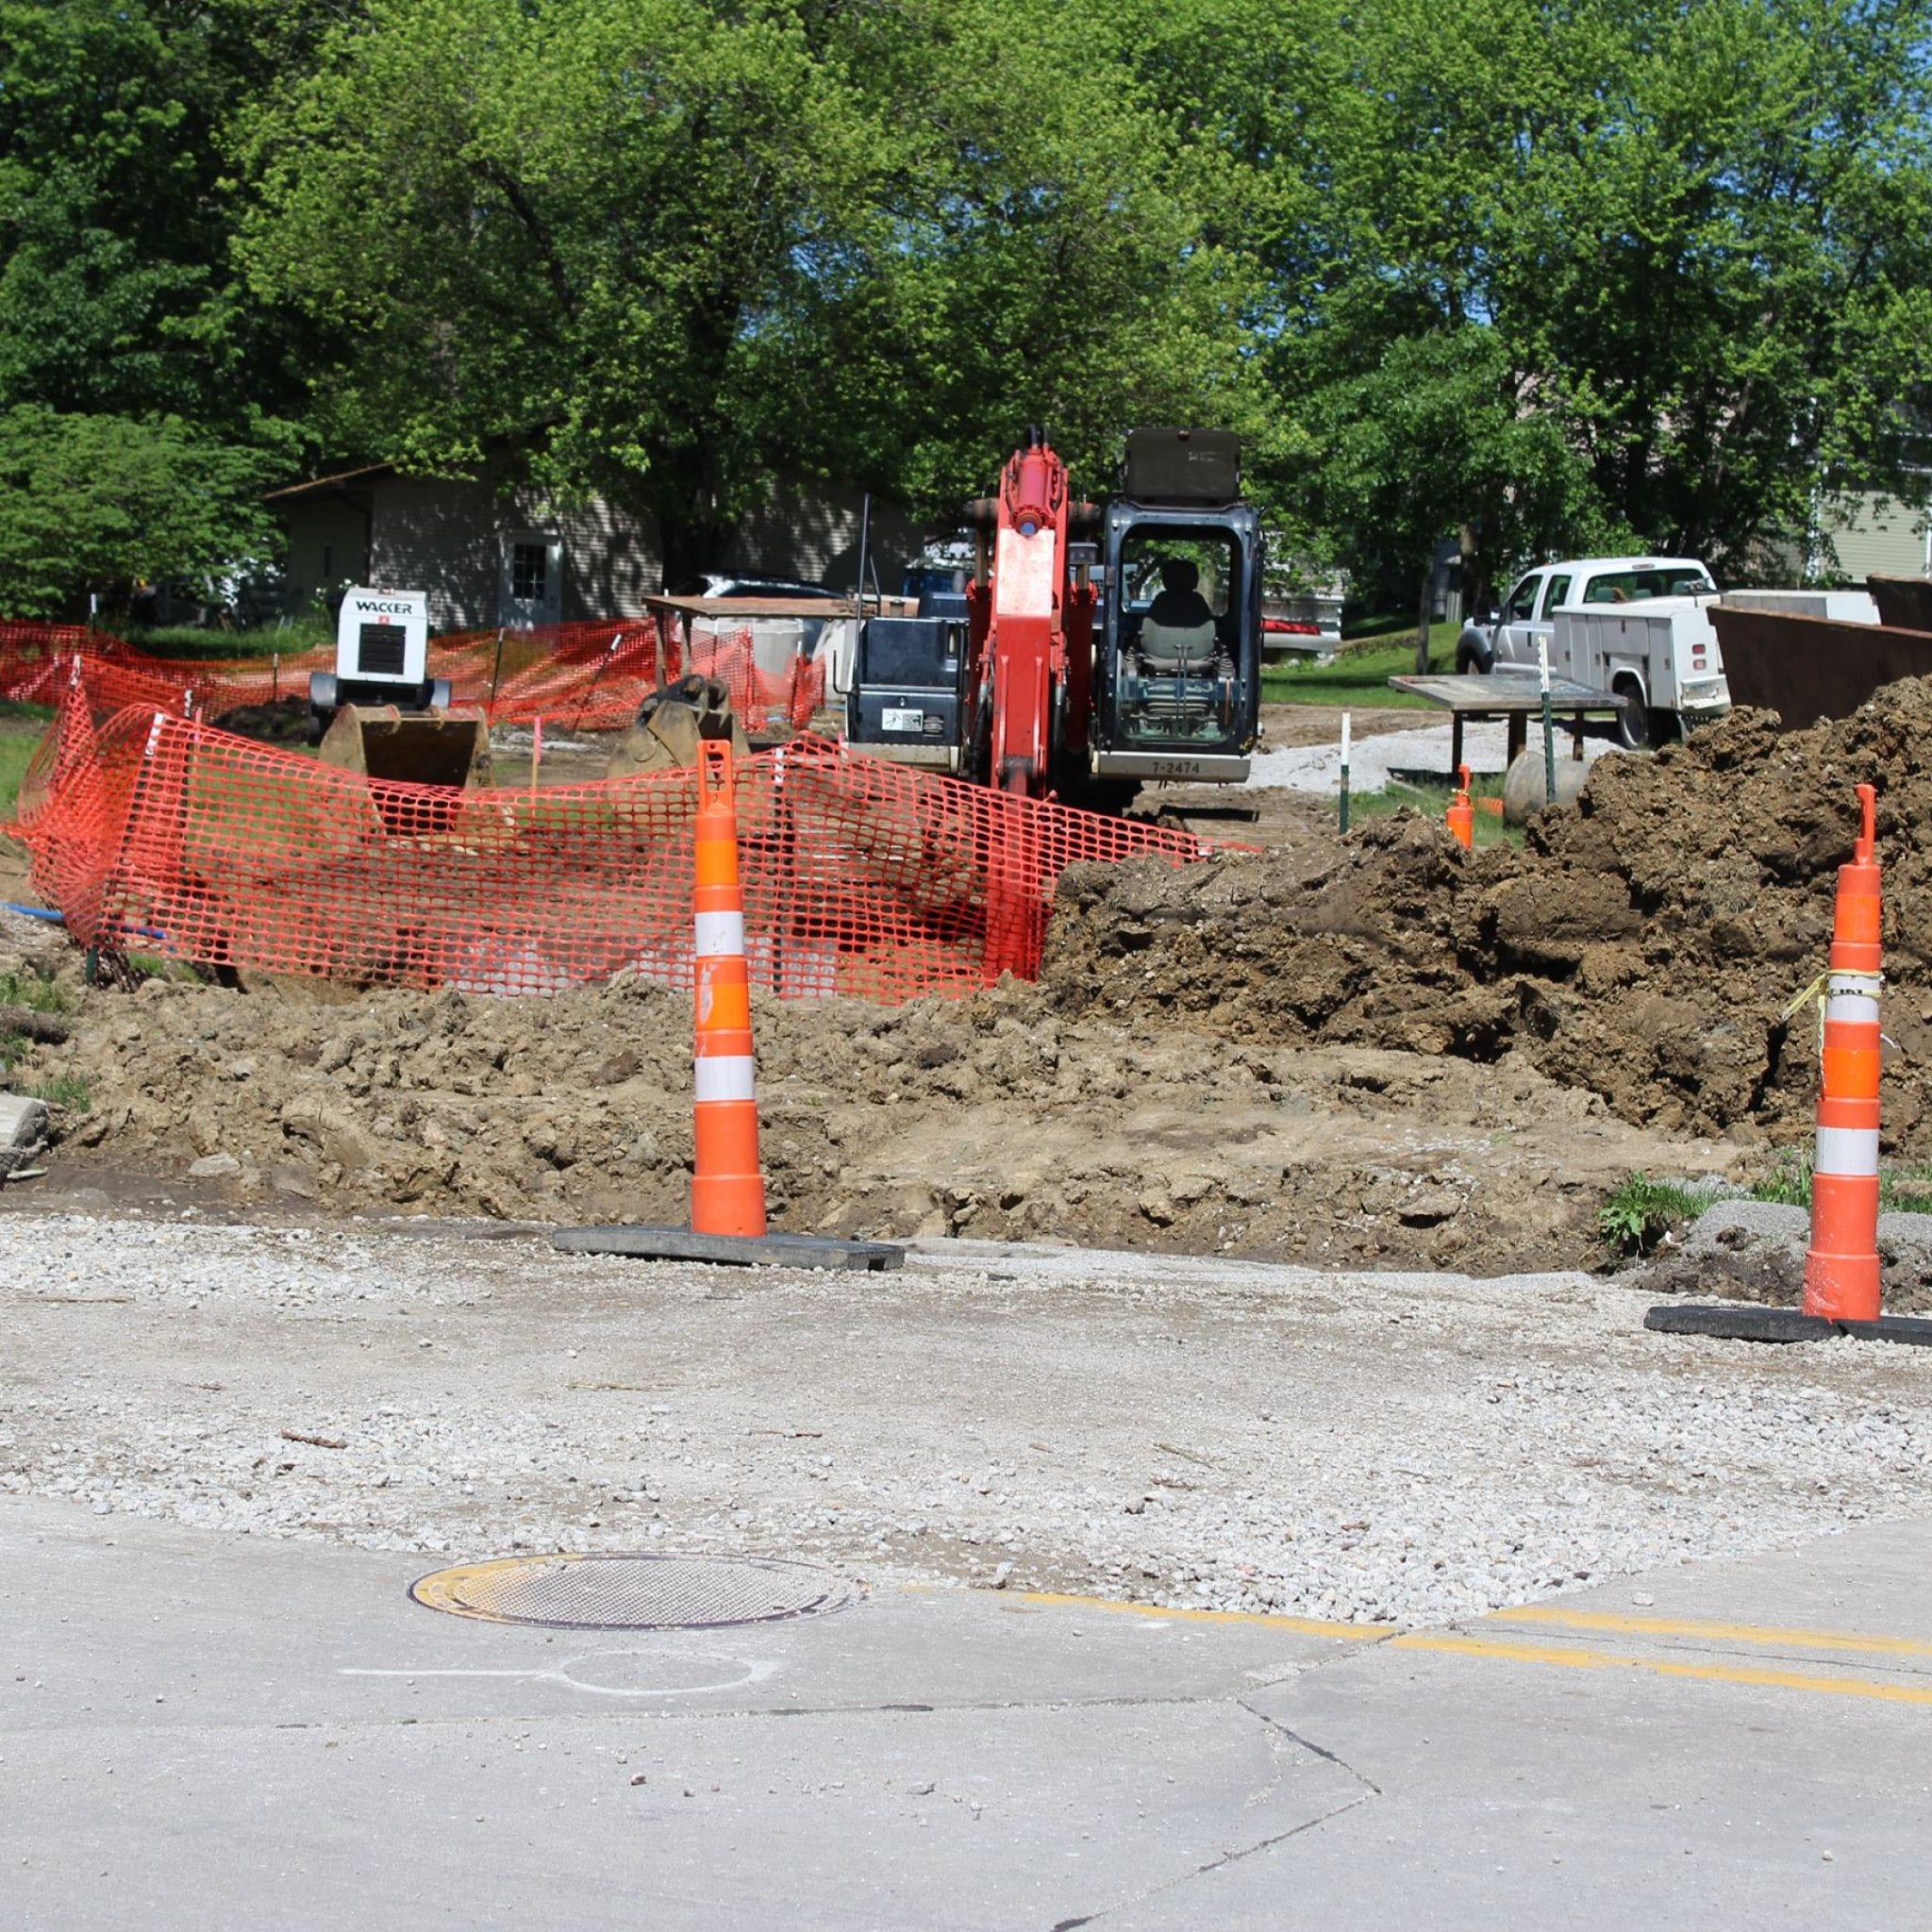 Construction Update: Portion of West 8th to be closed starting June 1